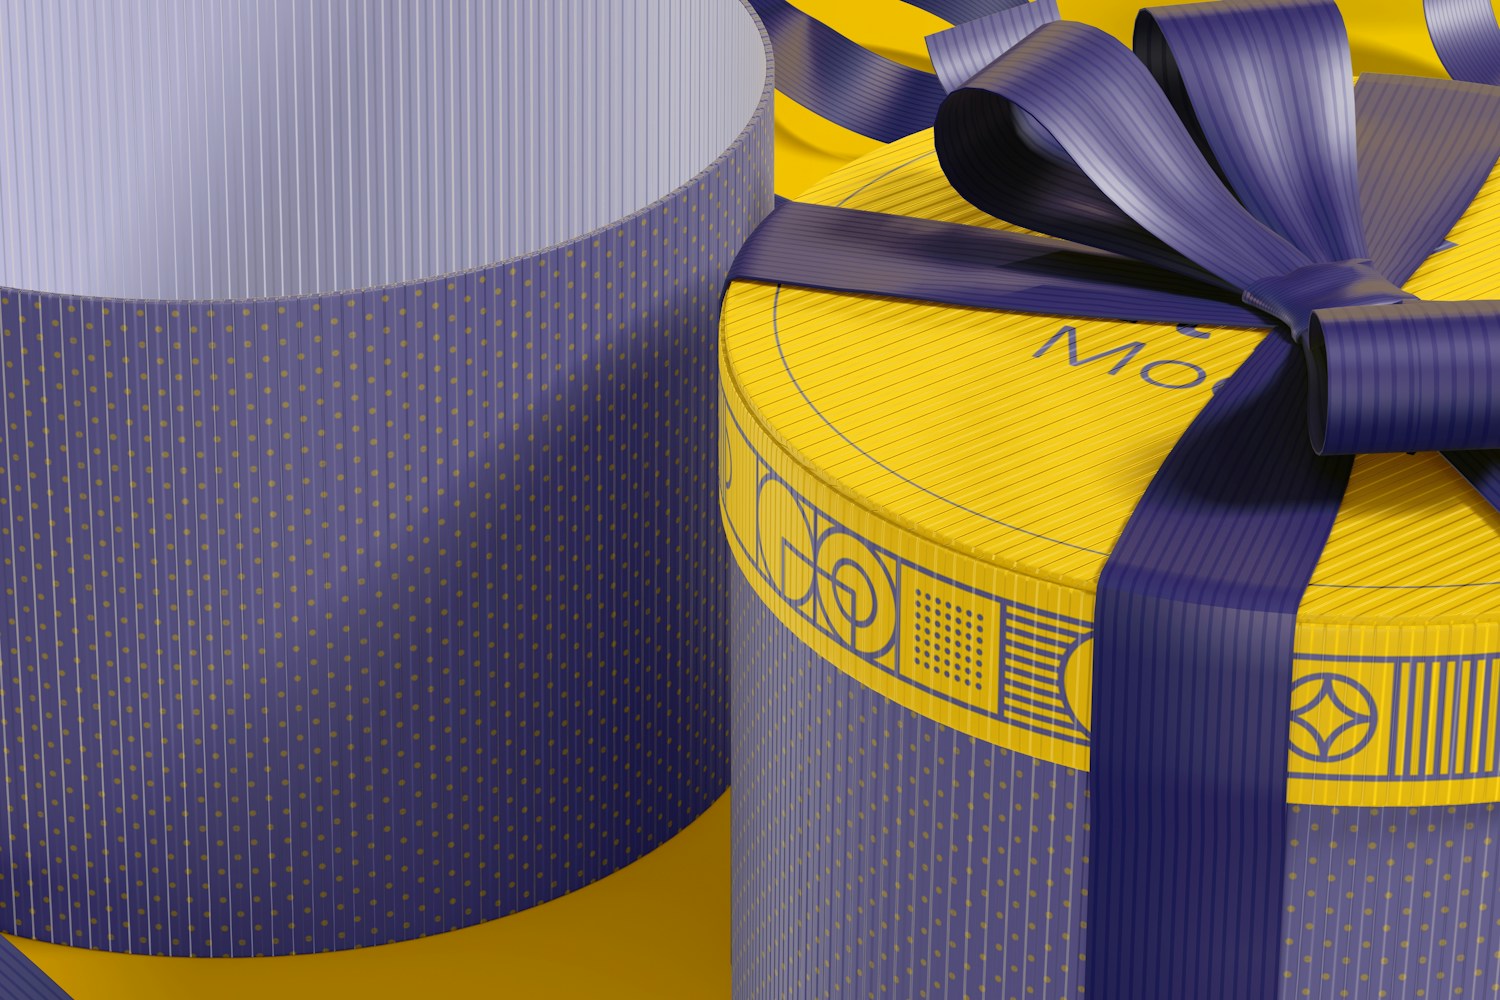 Notice how realistic the corrugated material looks in the box and the fabric-like appearance of the ribbon.